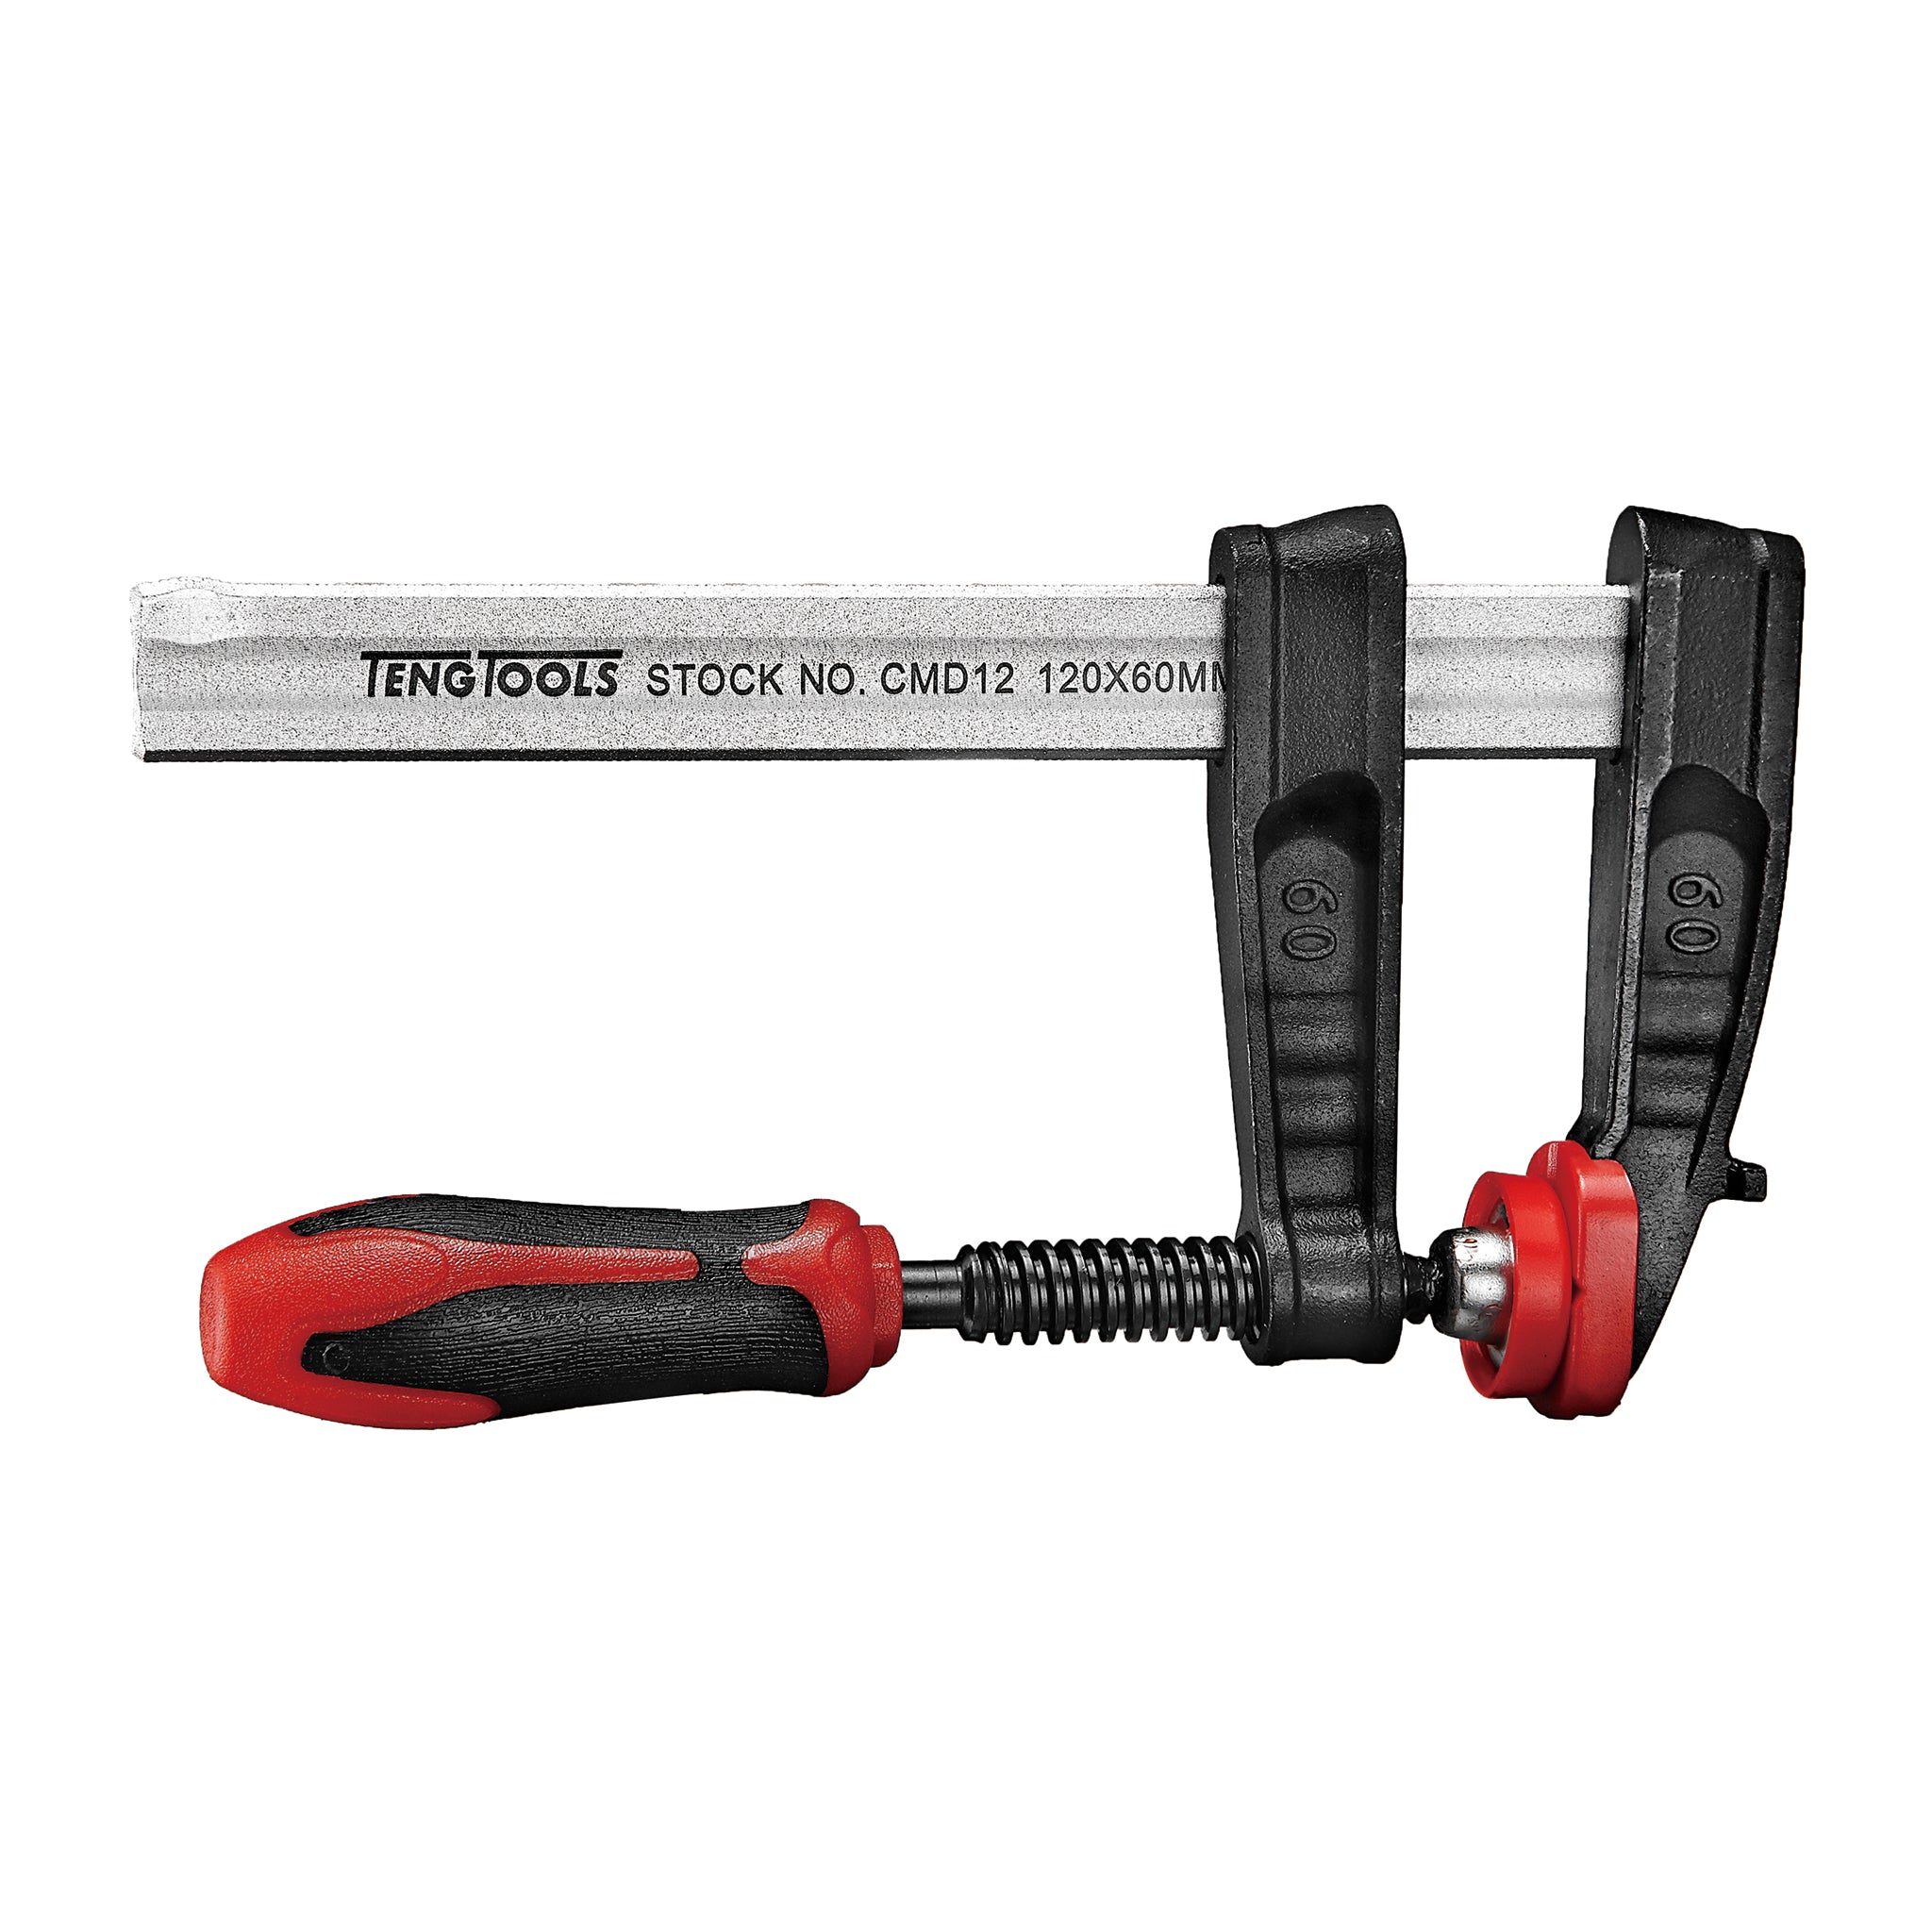 Teng Tools F-Clamps With Bi Material Handles - 120x60MM